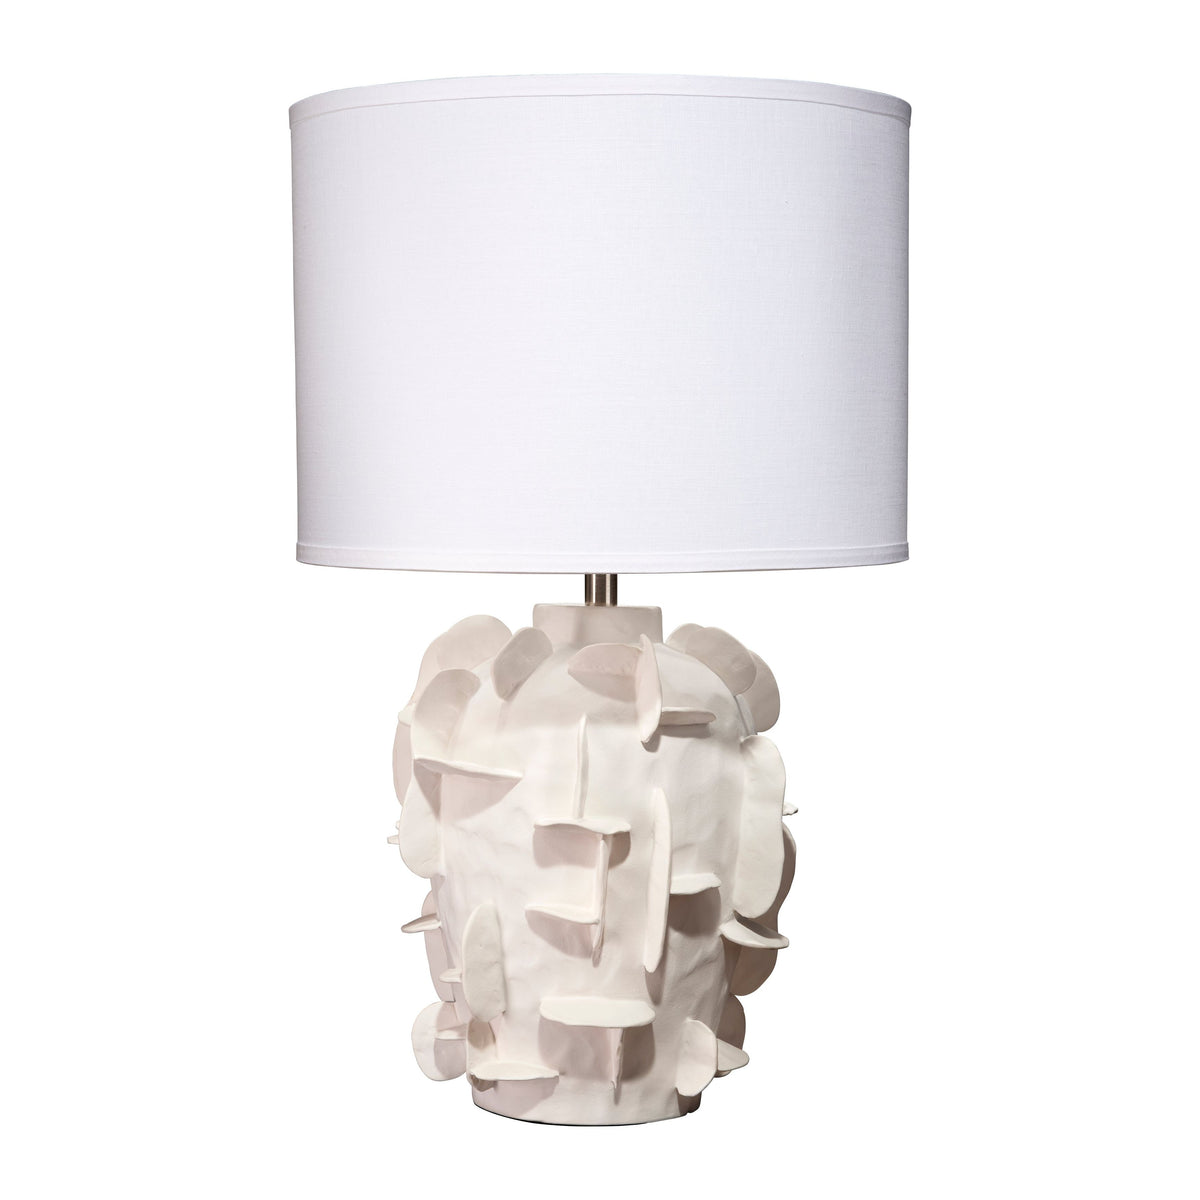 Jamie Young Company - 9HELIOSTLWH -  Helios Table Lamp - Helios - White